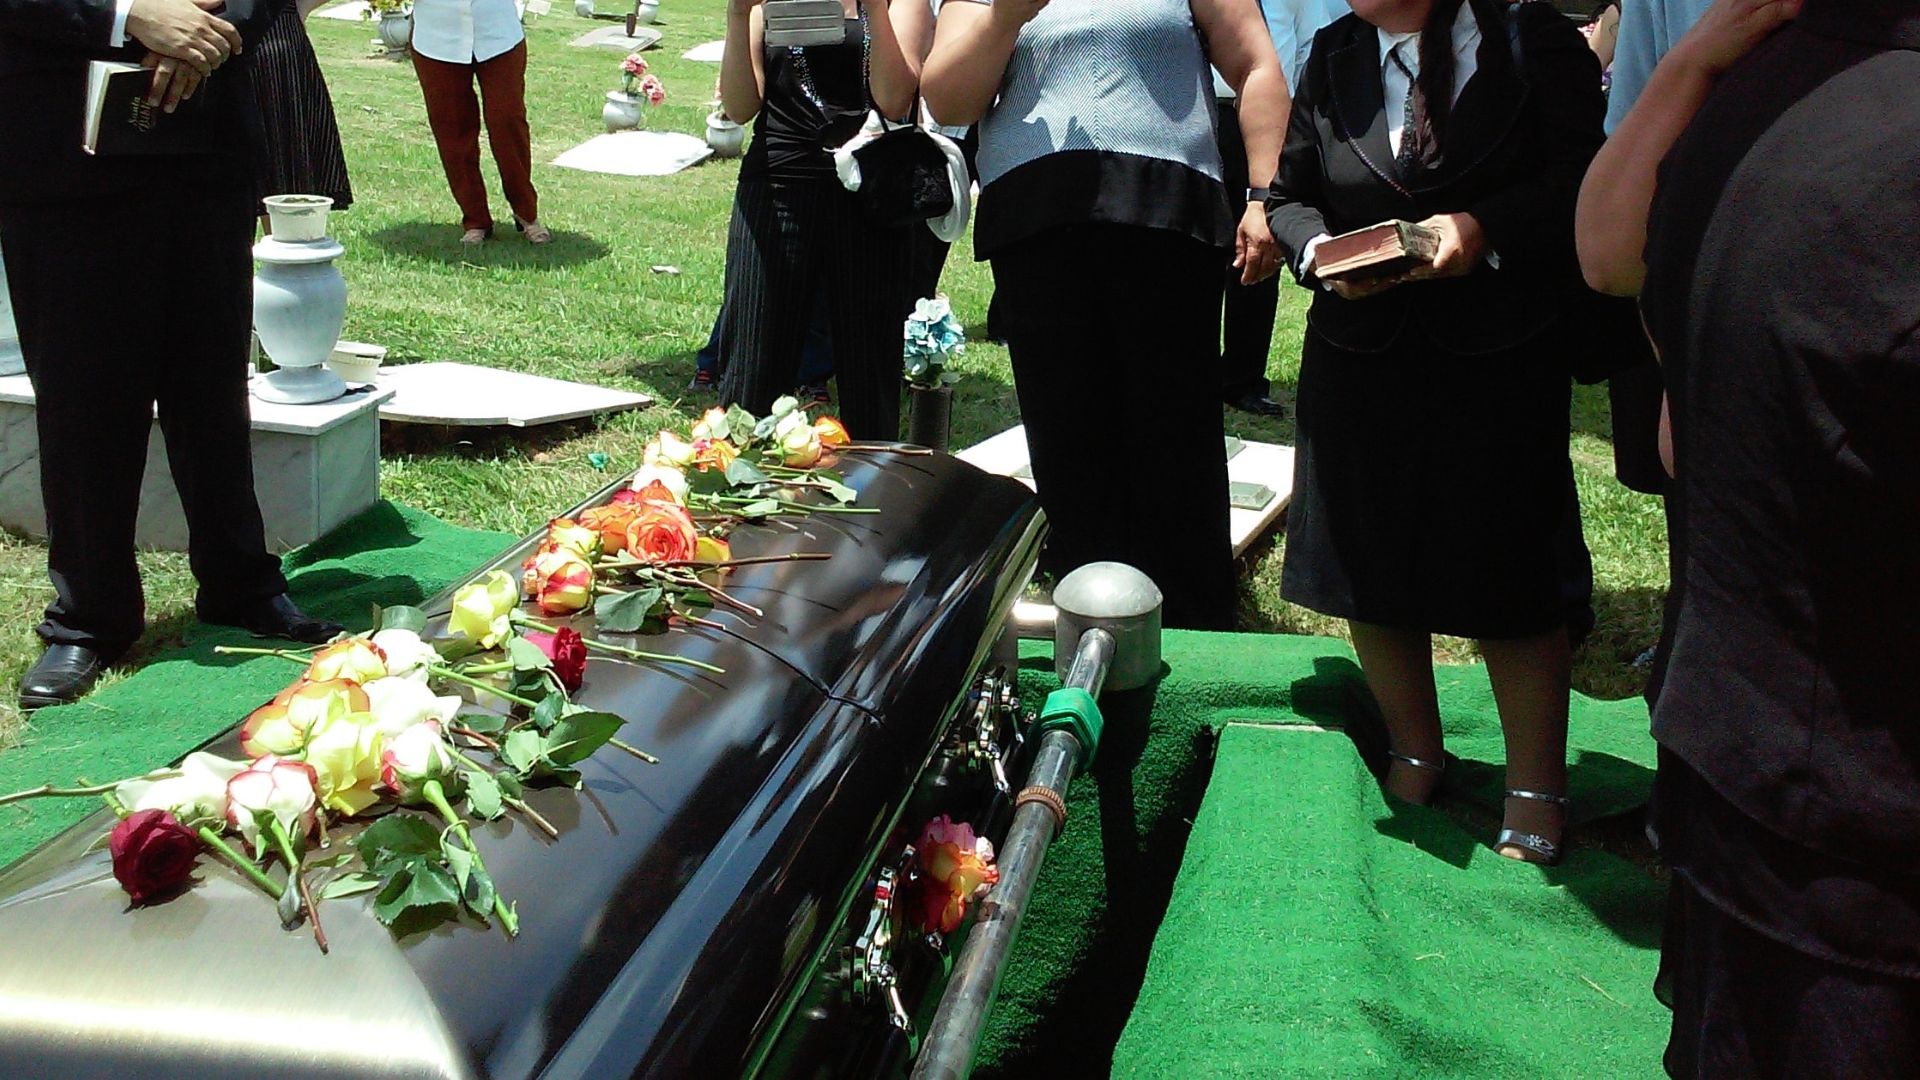 Roses on top of a black casket surrounded by grieving people